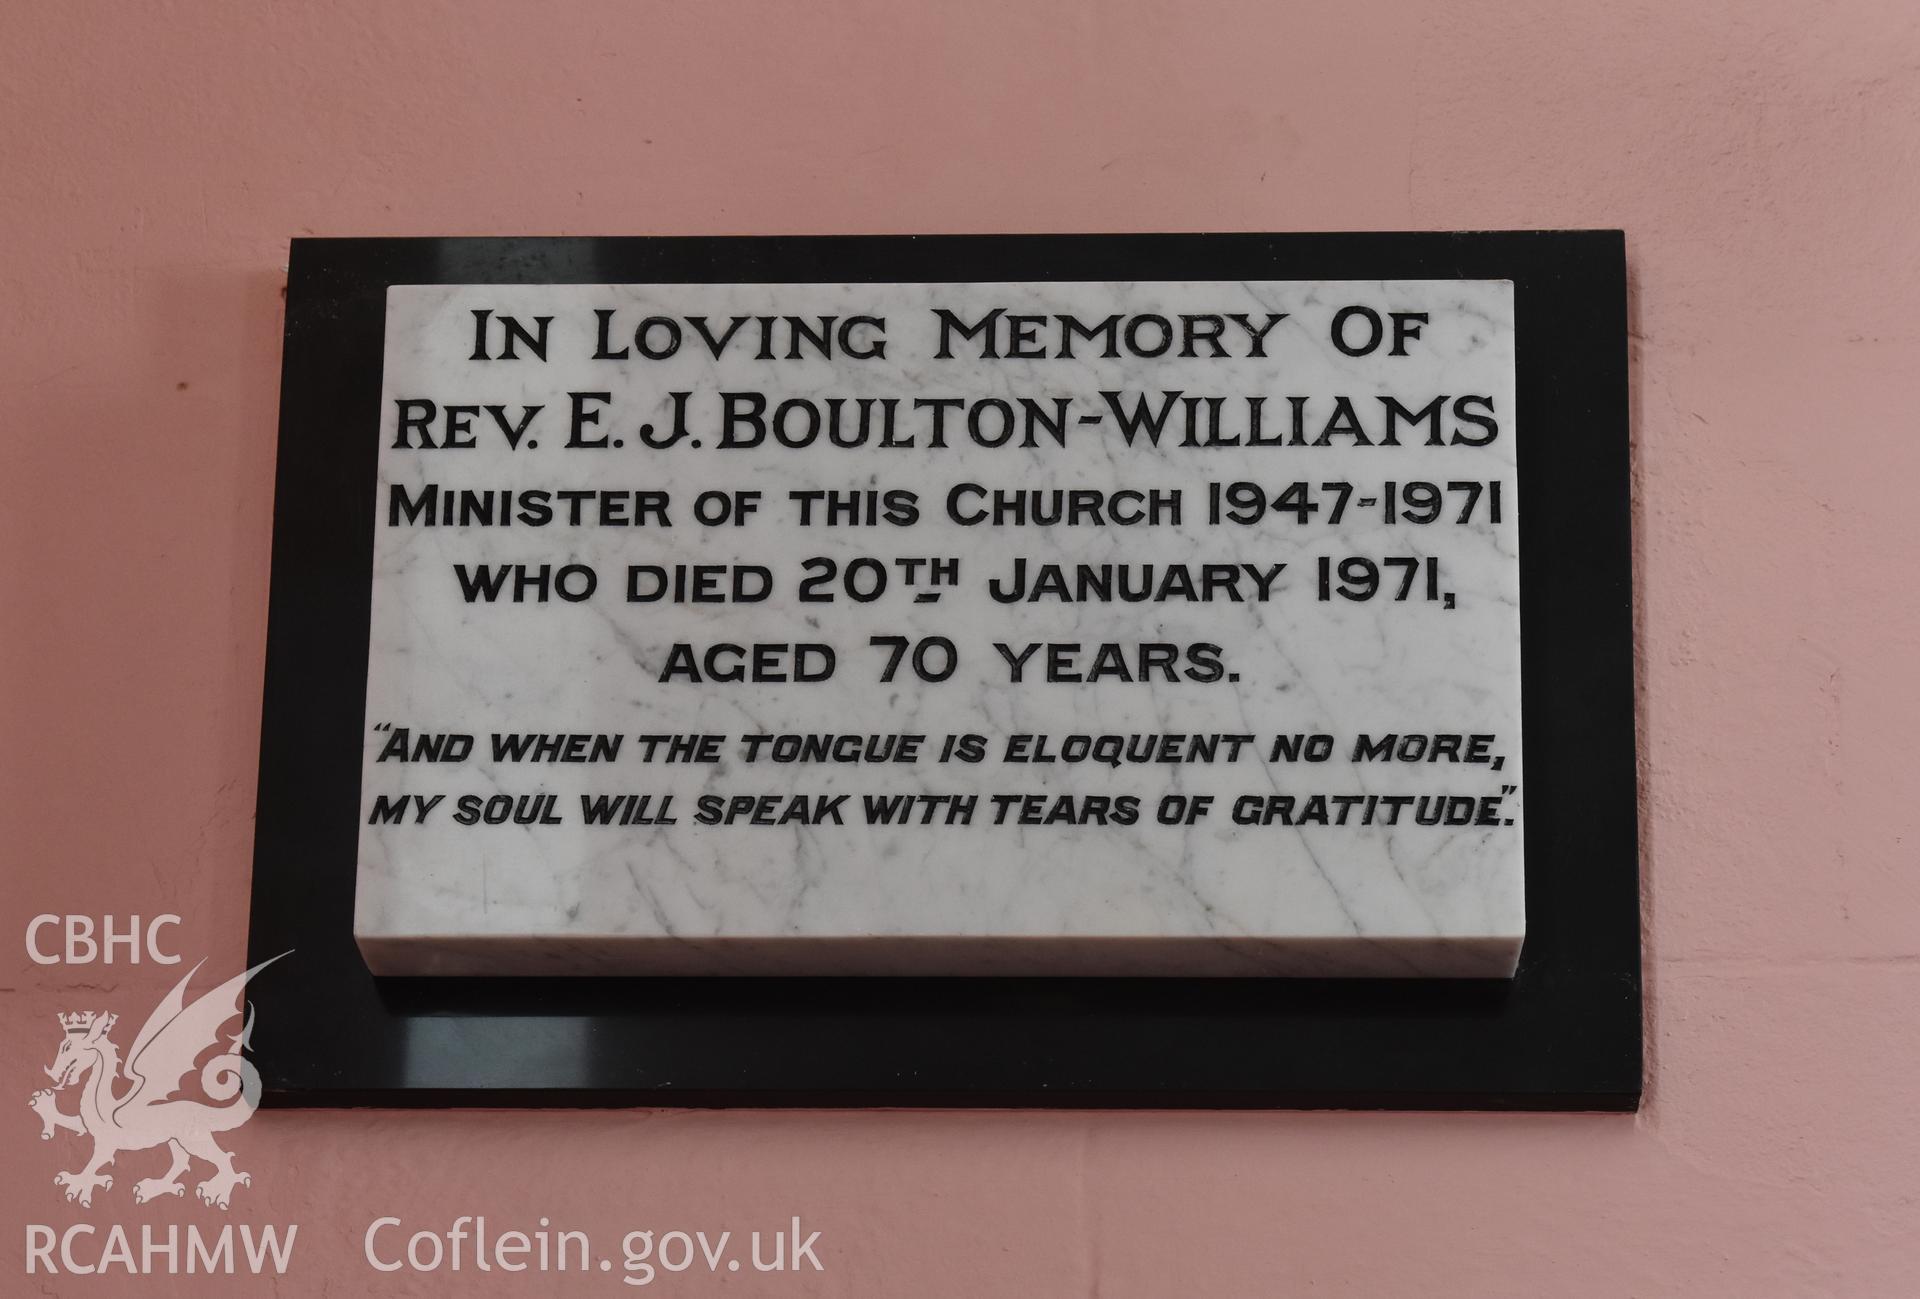 Colour photograph showing detail of memorial plaque dedicated to the Rev. E. J. Boulton-Williams at the Baptist & Unitarian Chapel, Nottage, Porthcawl. Taken during photographic survey conducted by Sue Fielding on 12th May 2018.